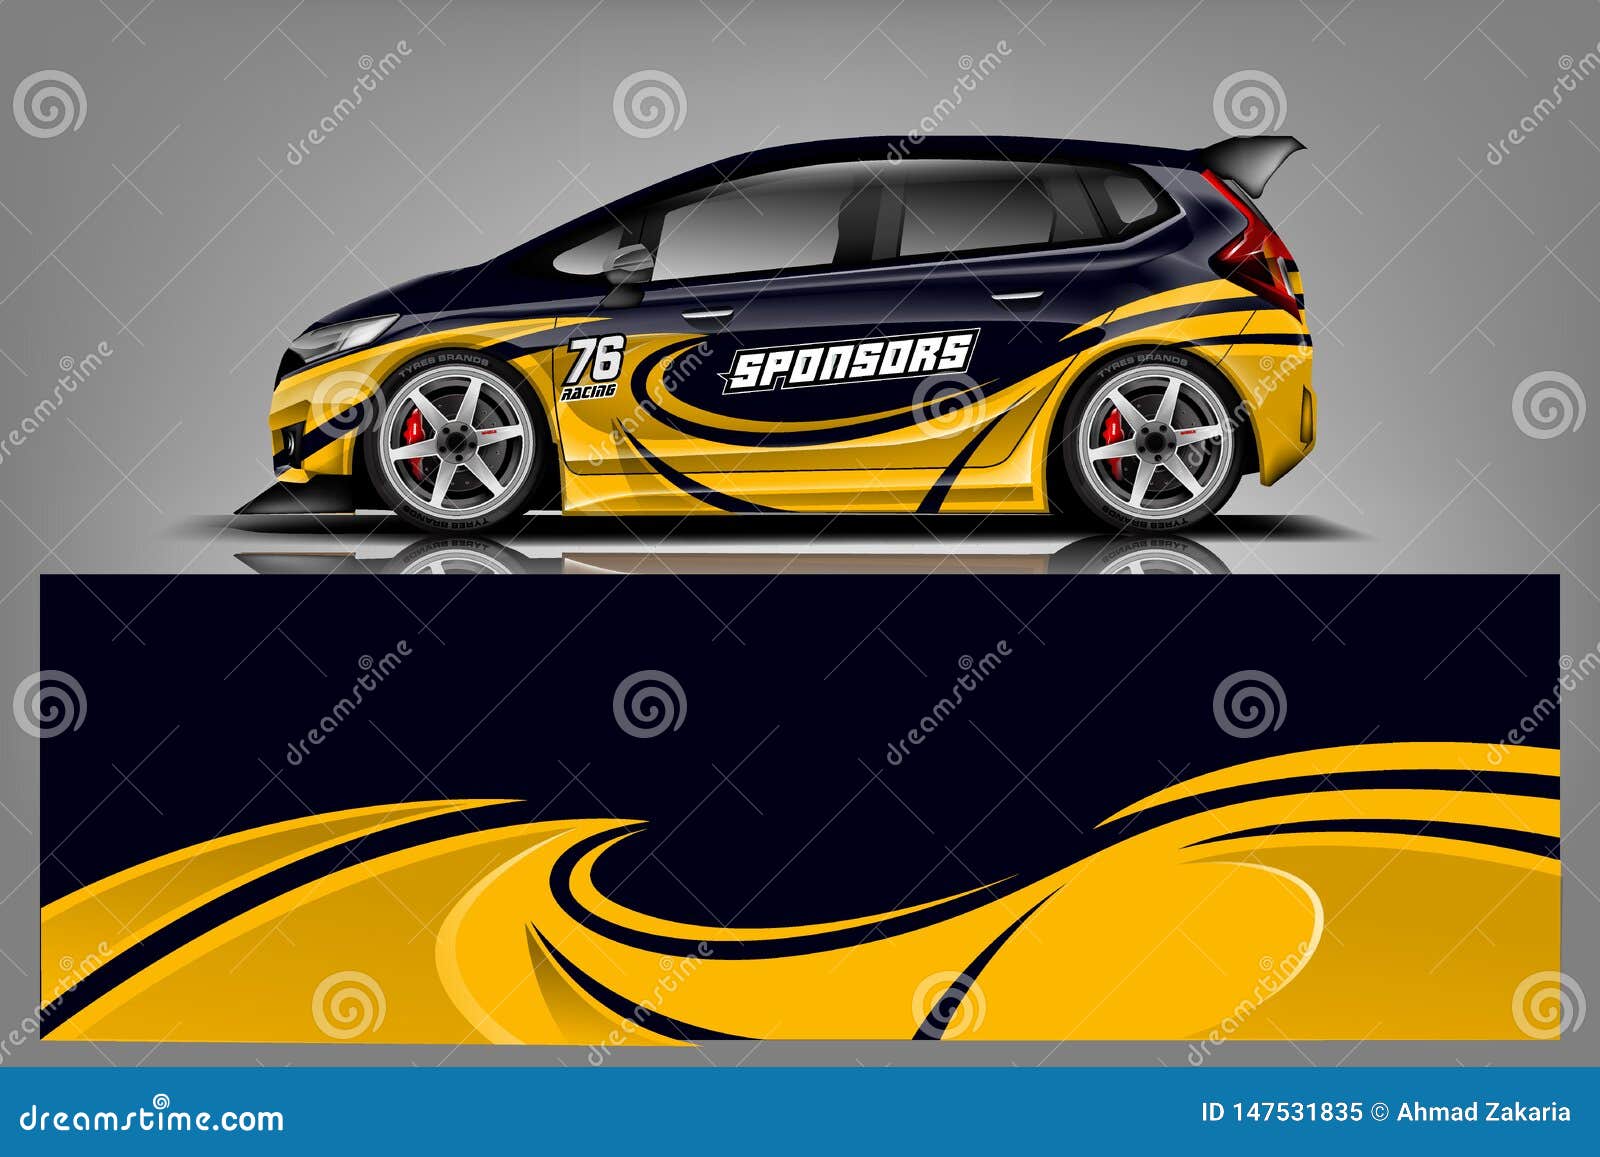 sport car wrap  , truck and cargo van decal. graphic abstract stripe racing background s for vehicle, rally, rac